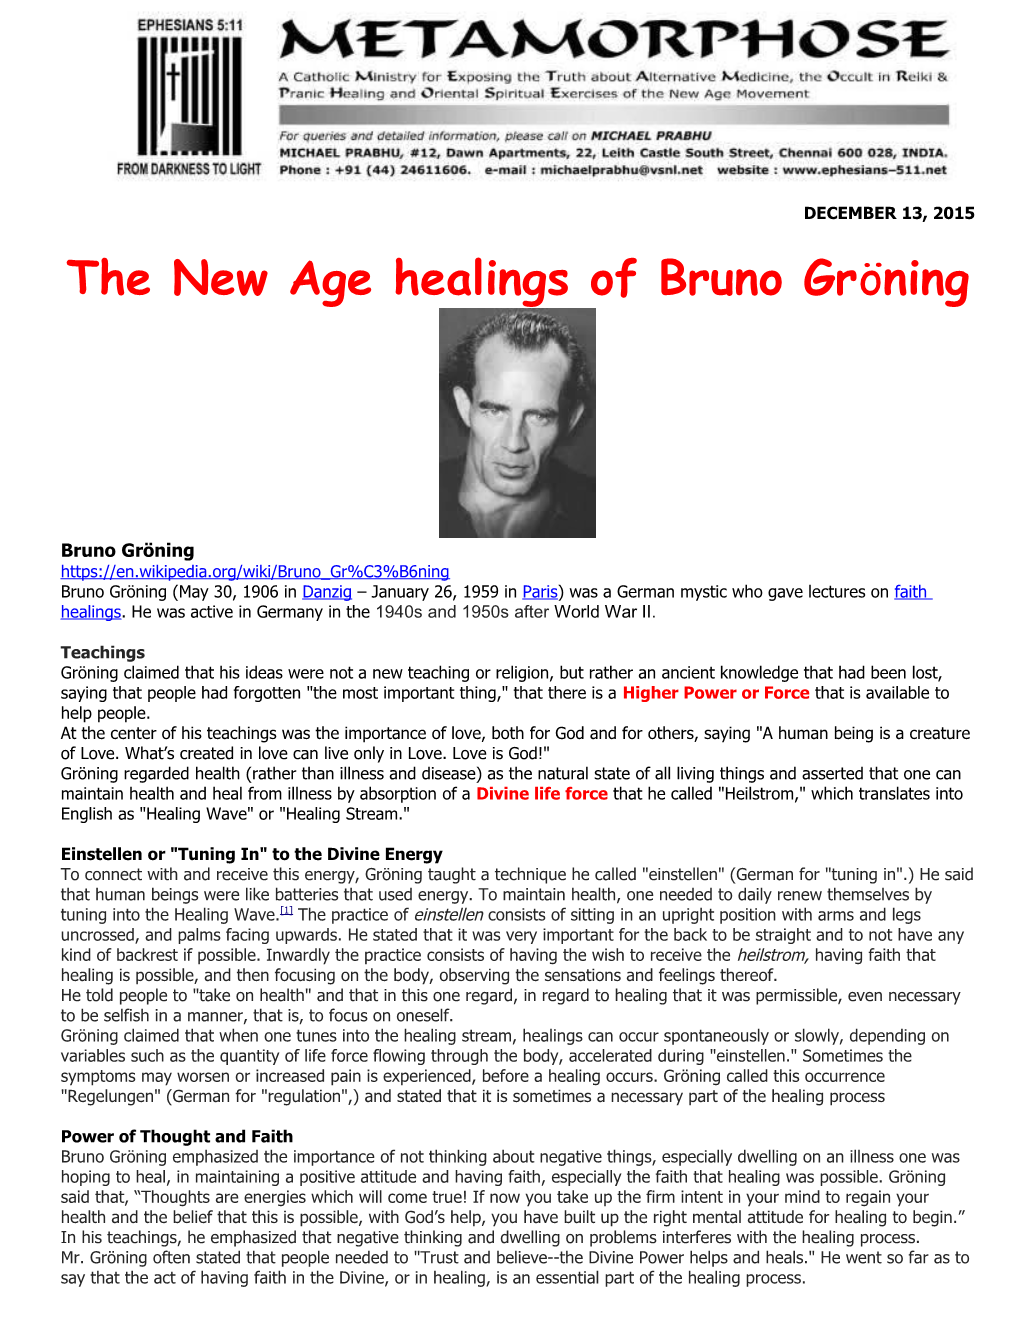 The New Age Healings of Bruno Gröning